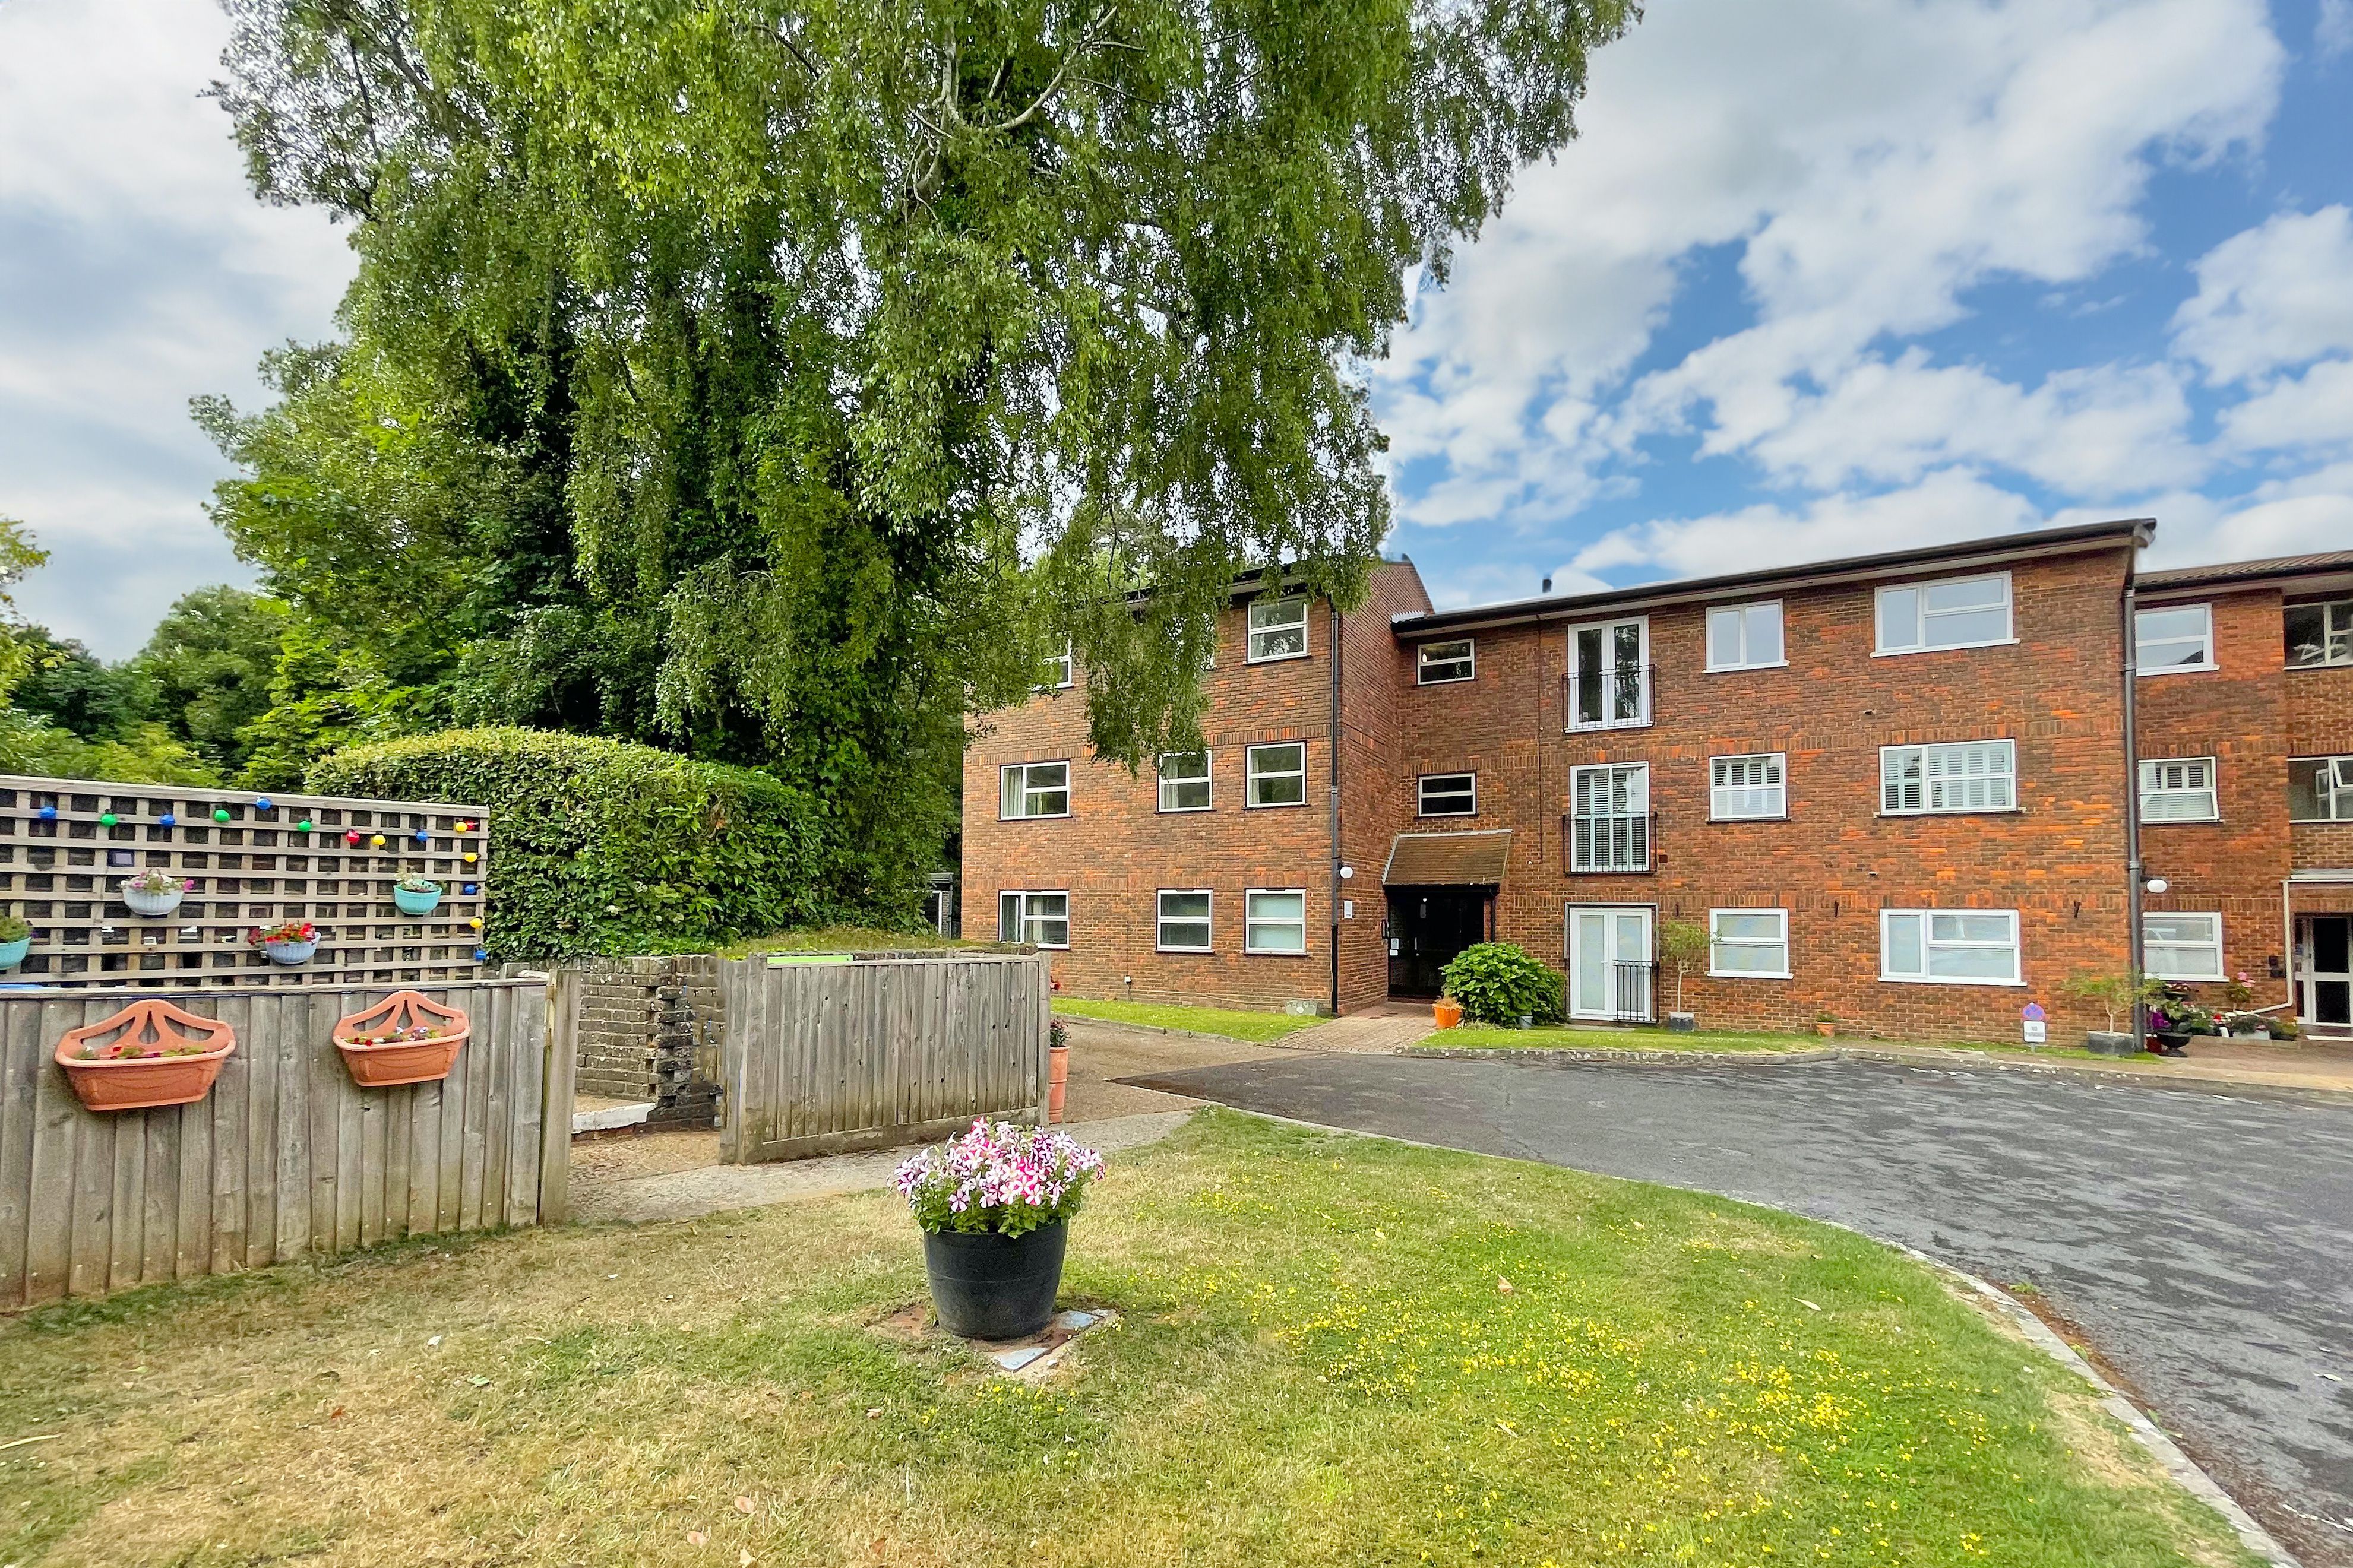 Crown Point House, Woodsland Road, Hassocks, West Sussex, BN6 8HT